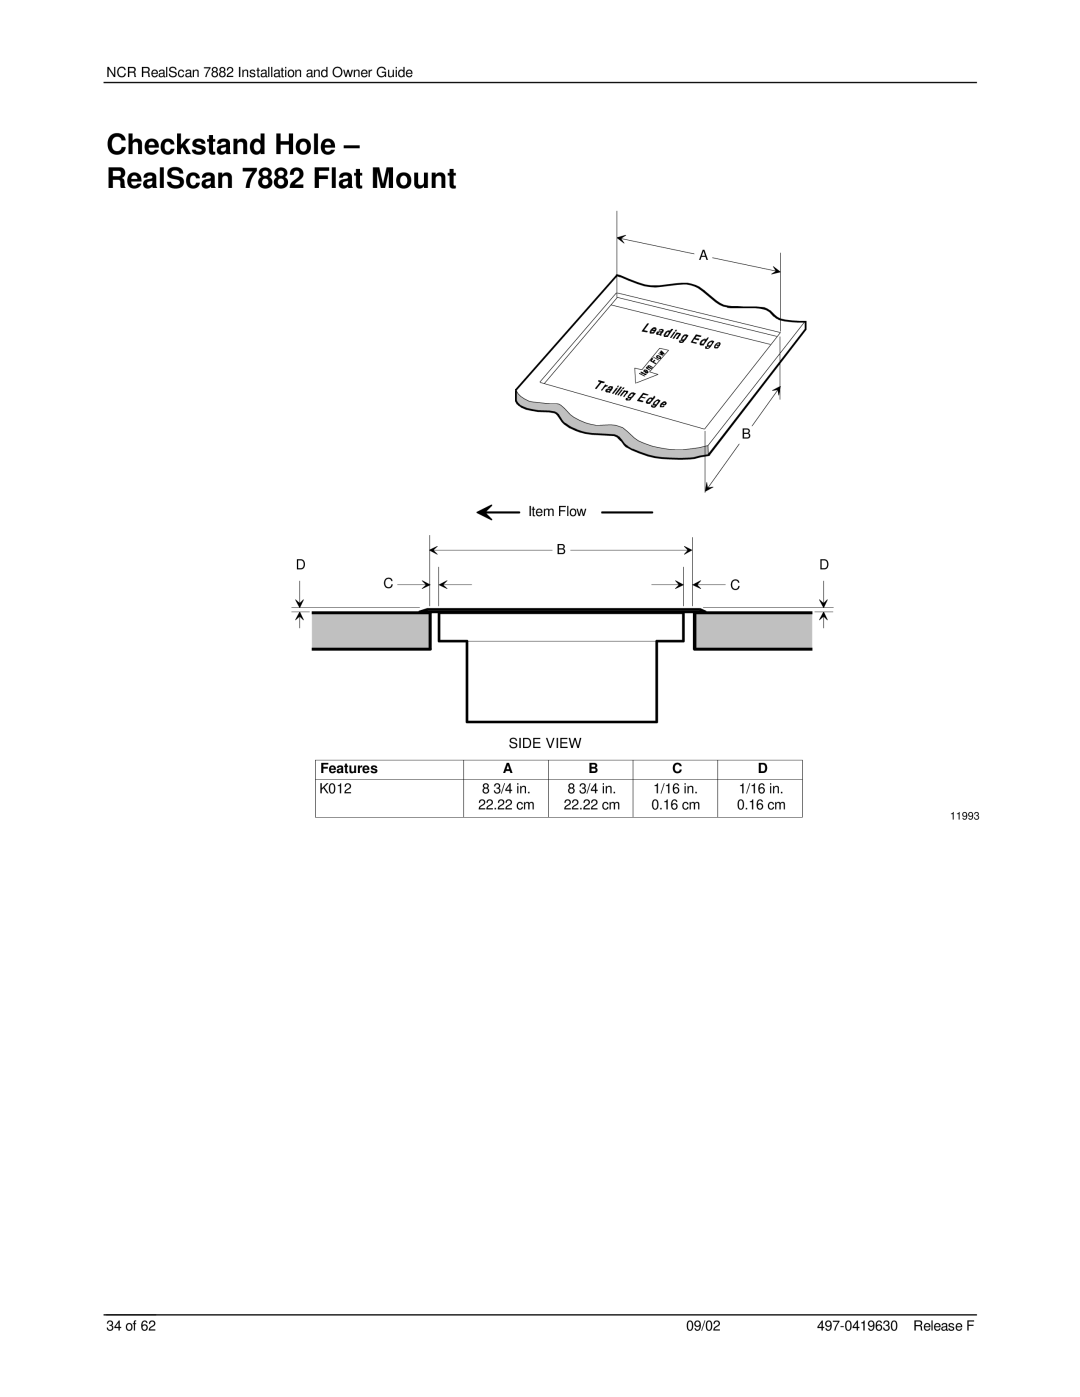 NCR manual Checkstand Hole - RealScan 7882 Flat Mount 